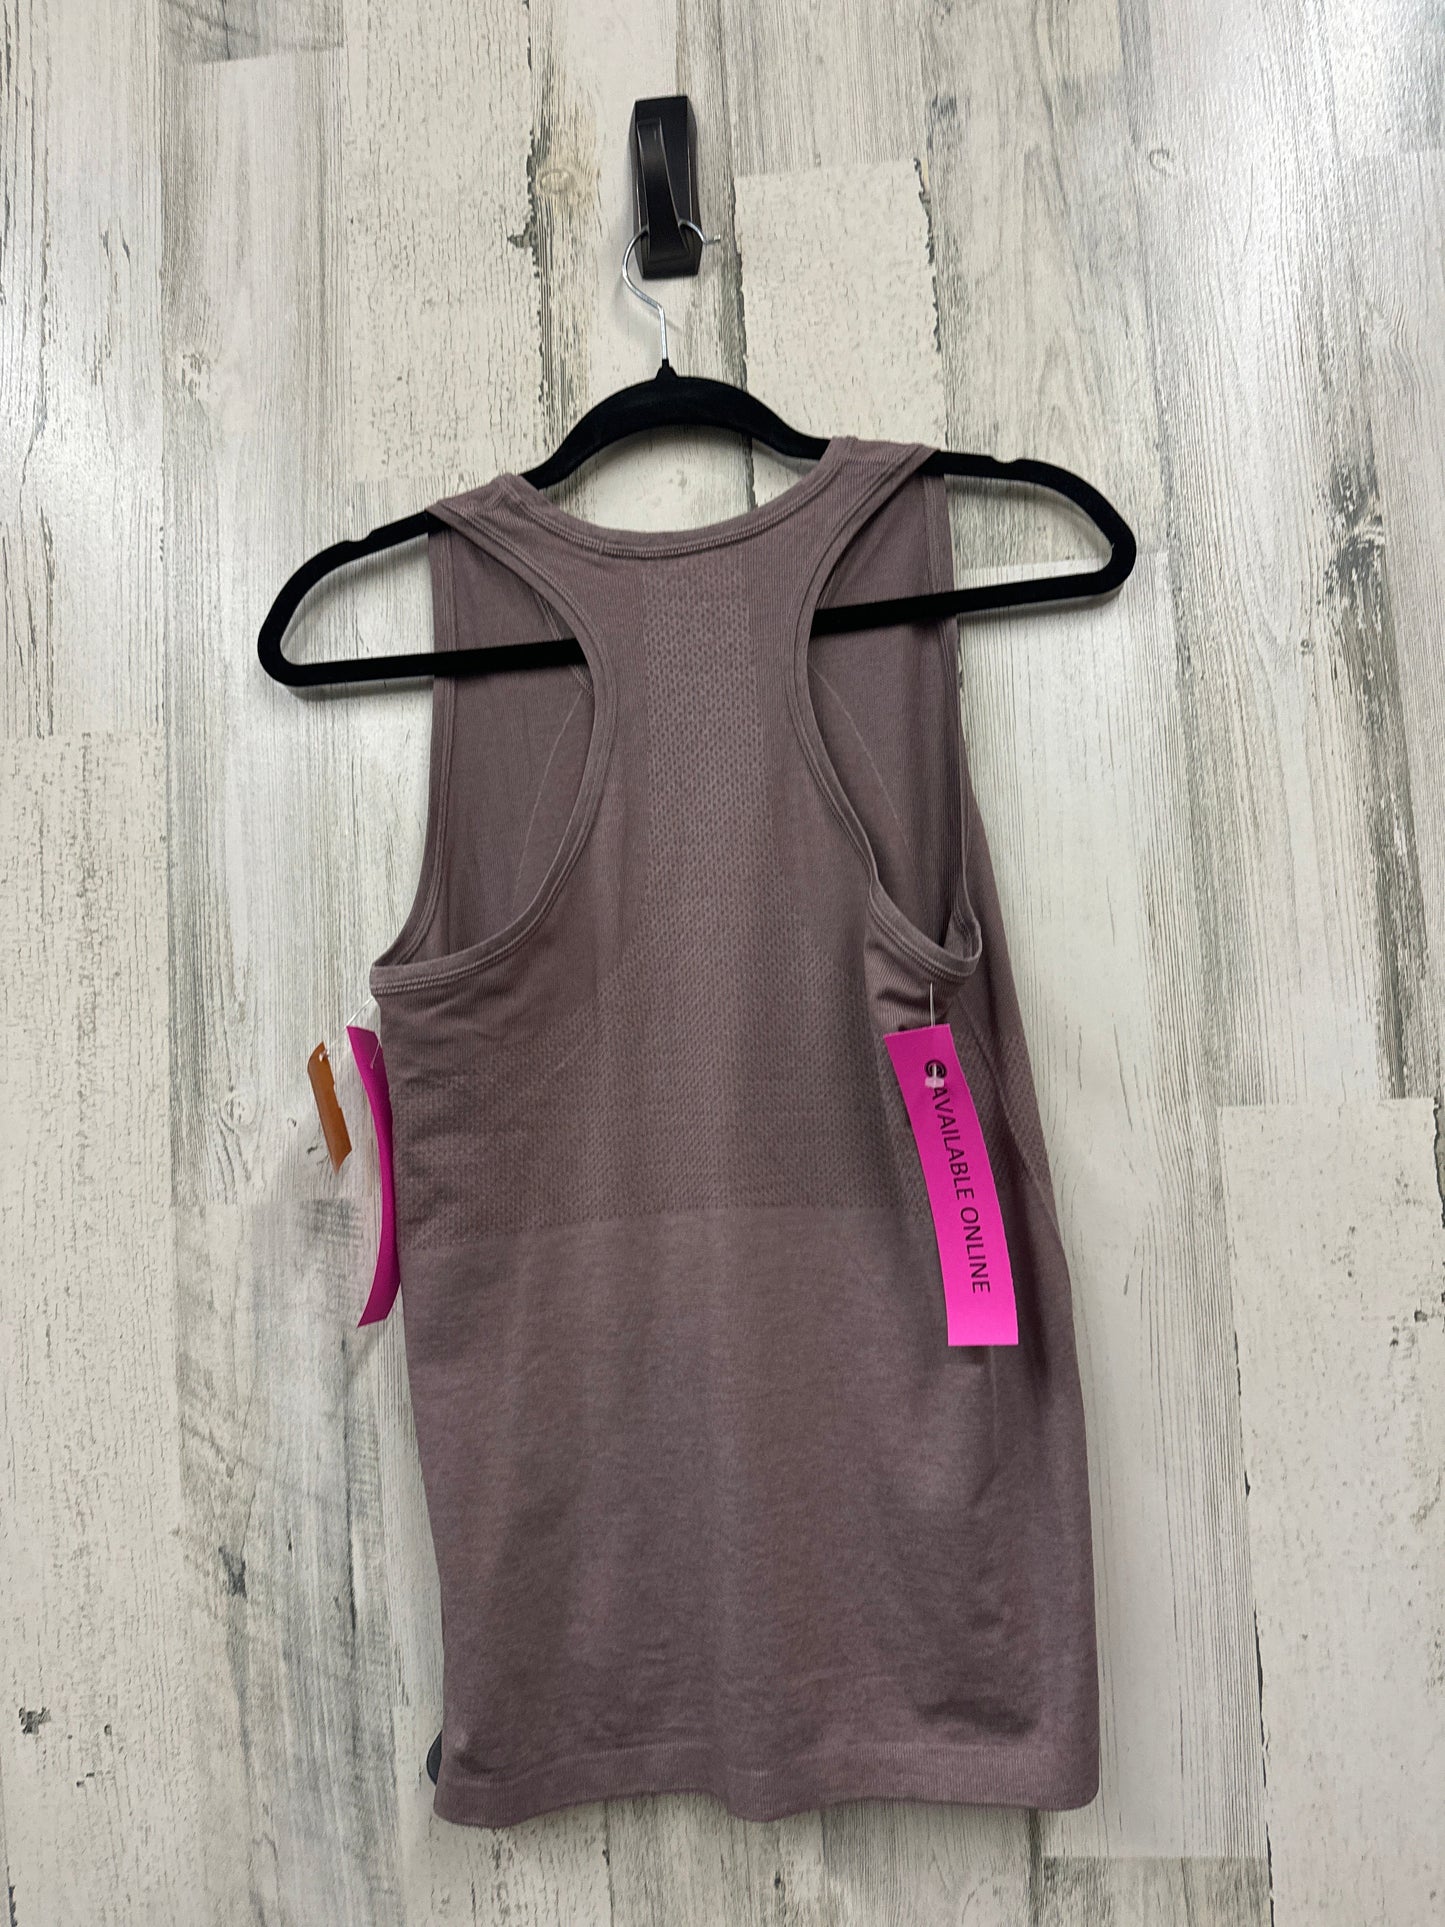 Athletic Tank Top By Banana Republic  Size: M